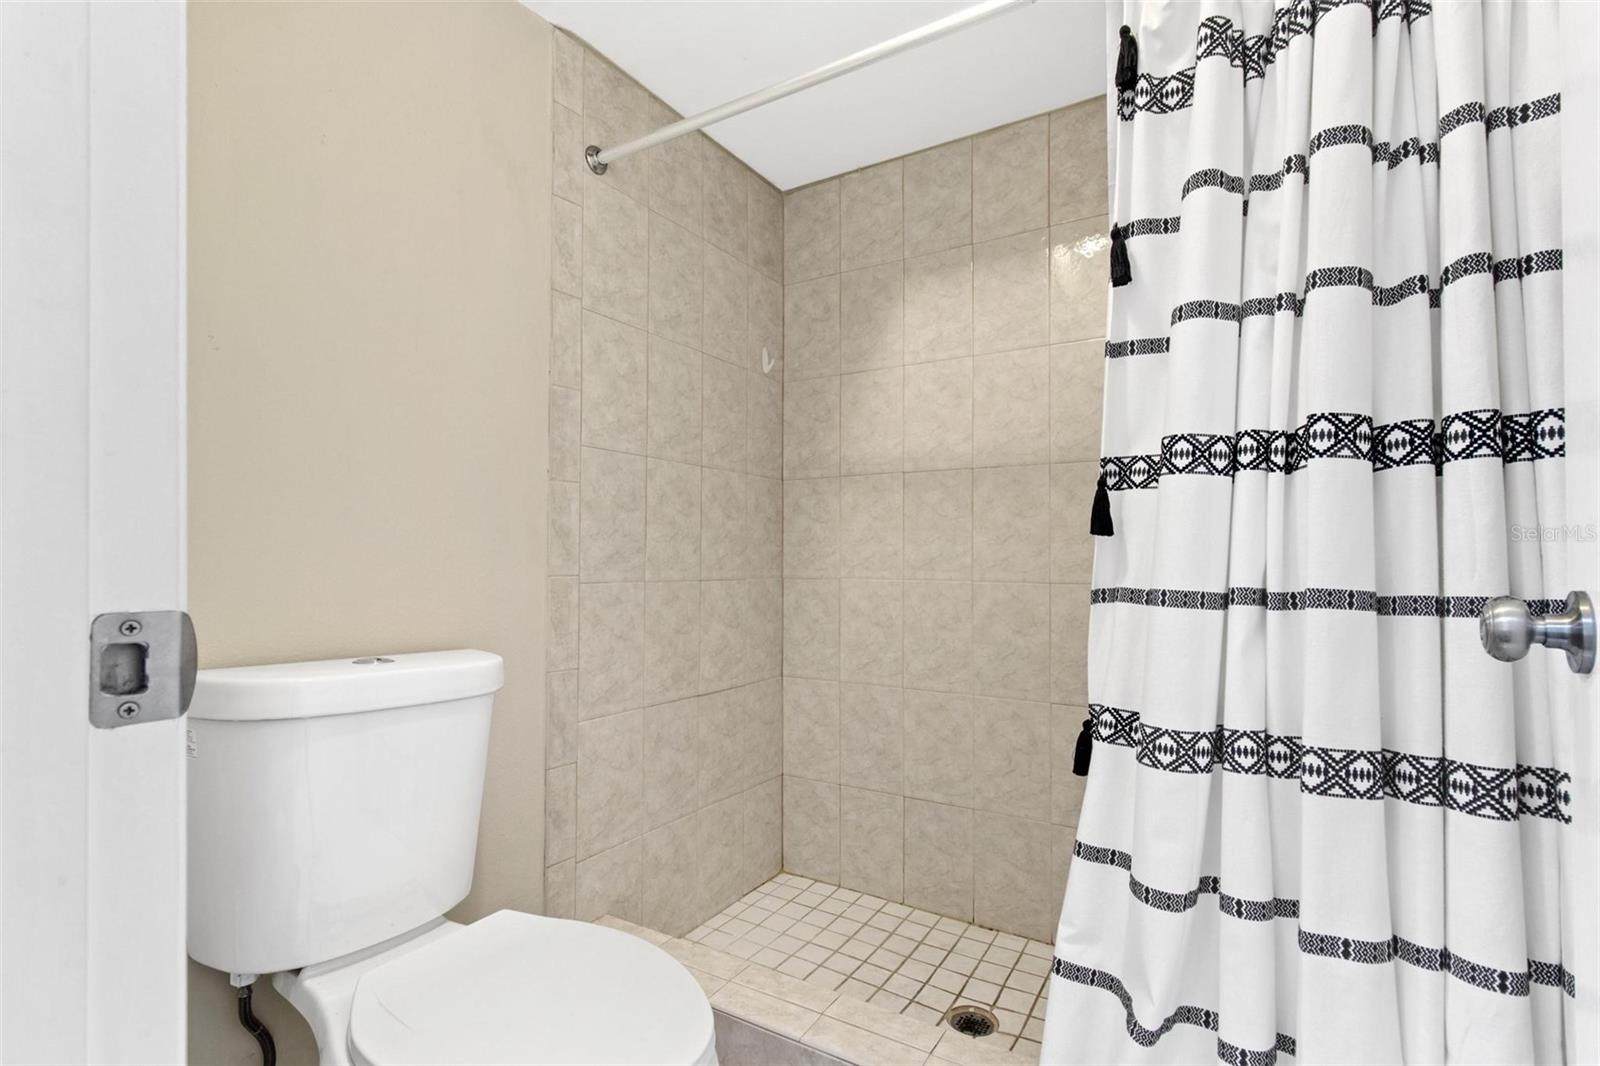 Separate primary comode and shower area en suite